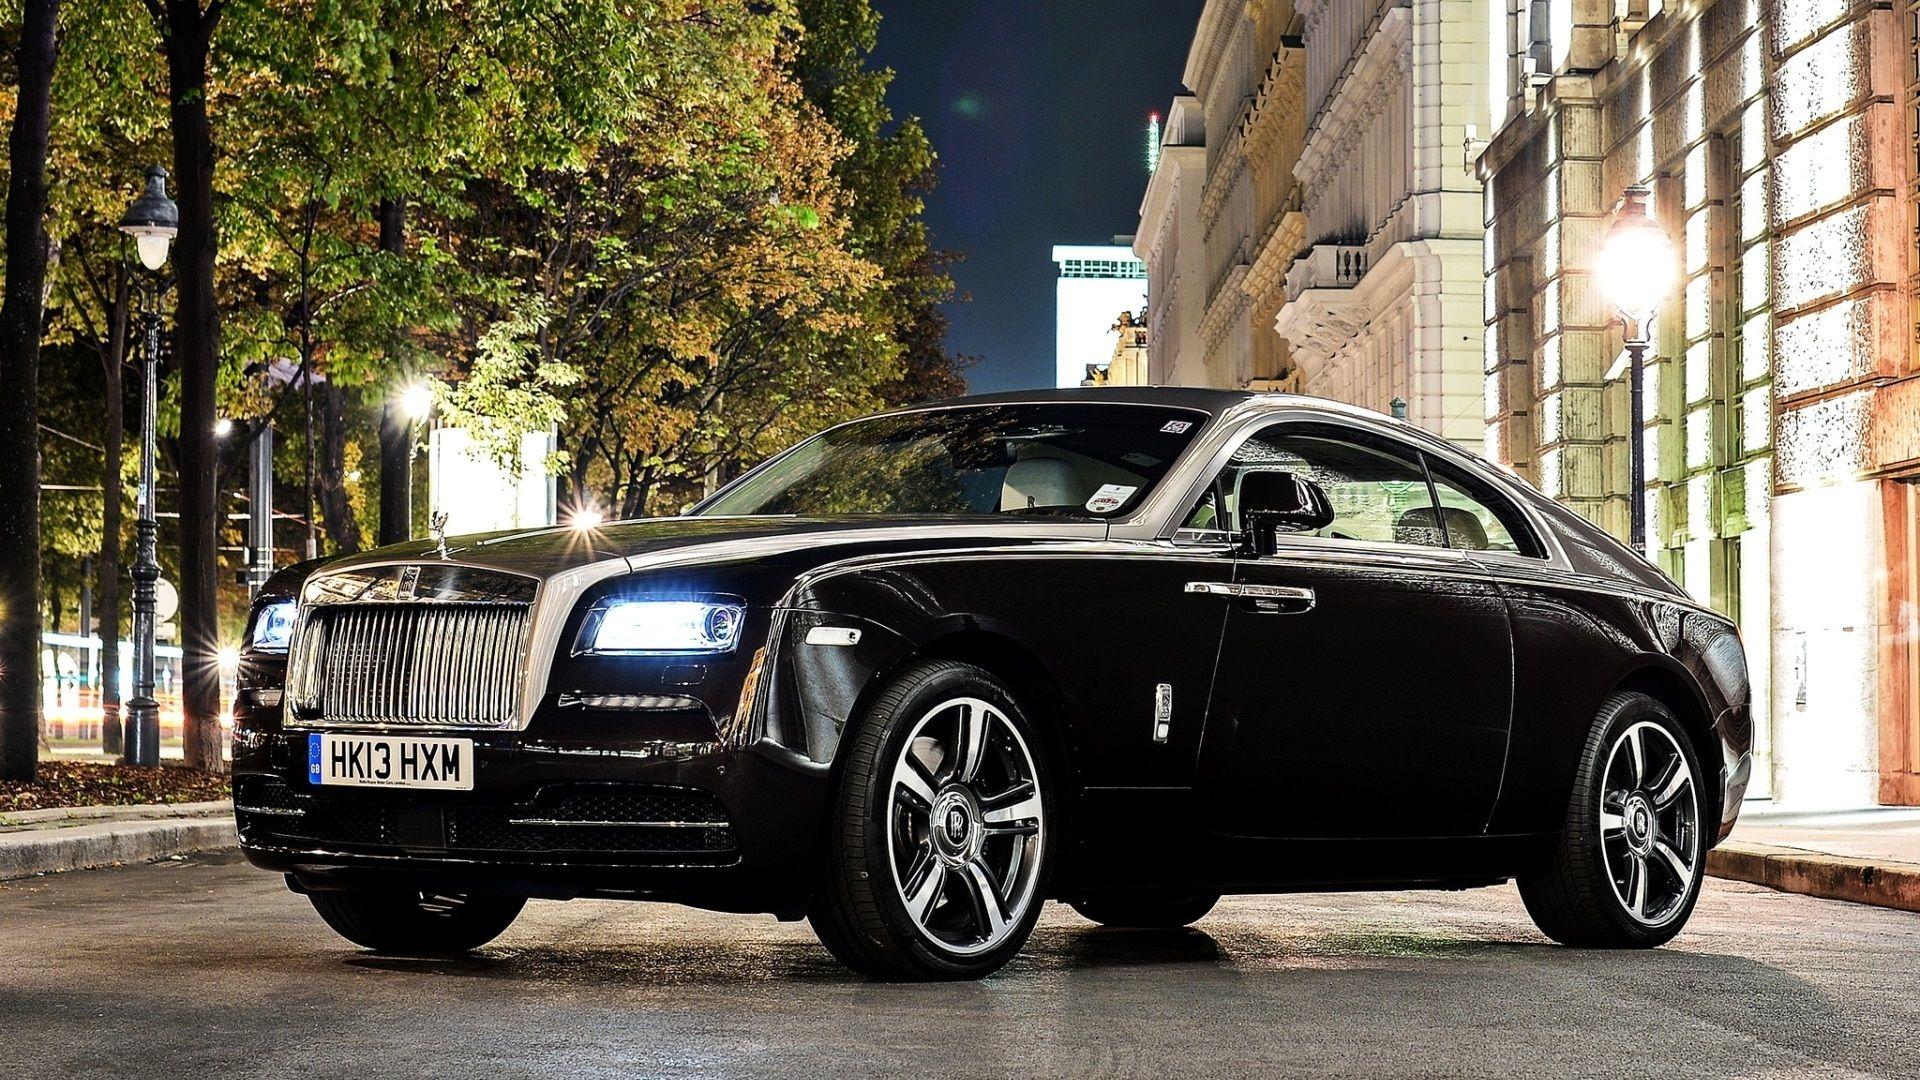 Rolls Royce Wraith Wallpaper HD Photo, Wallpaper and other